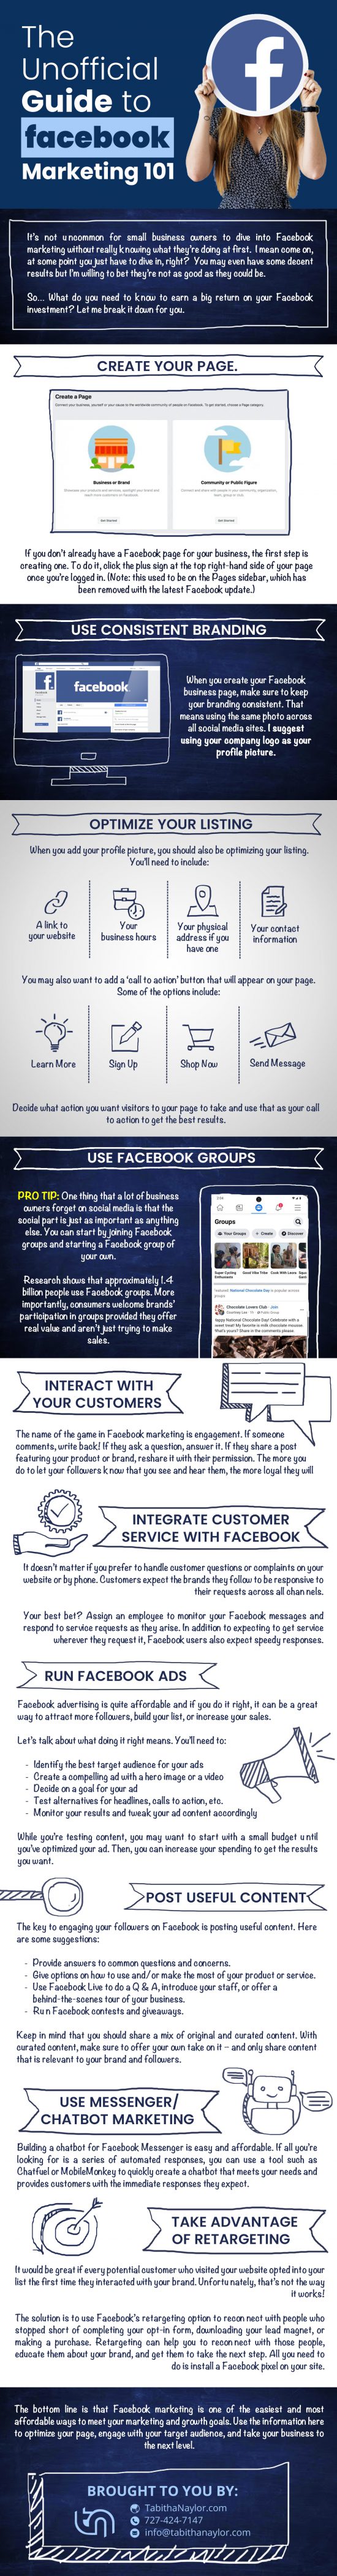 The-Unofficial-Guide-to-Facebook-Marketing-101-550x4208  